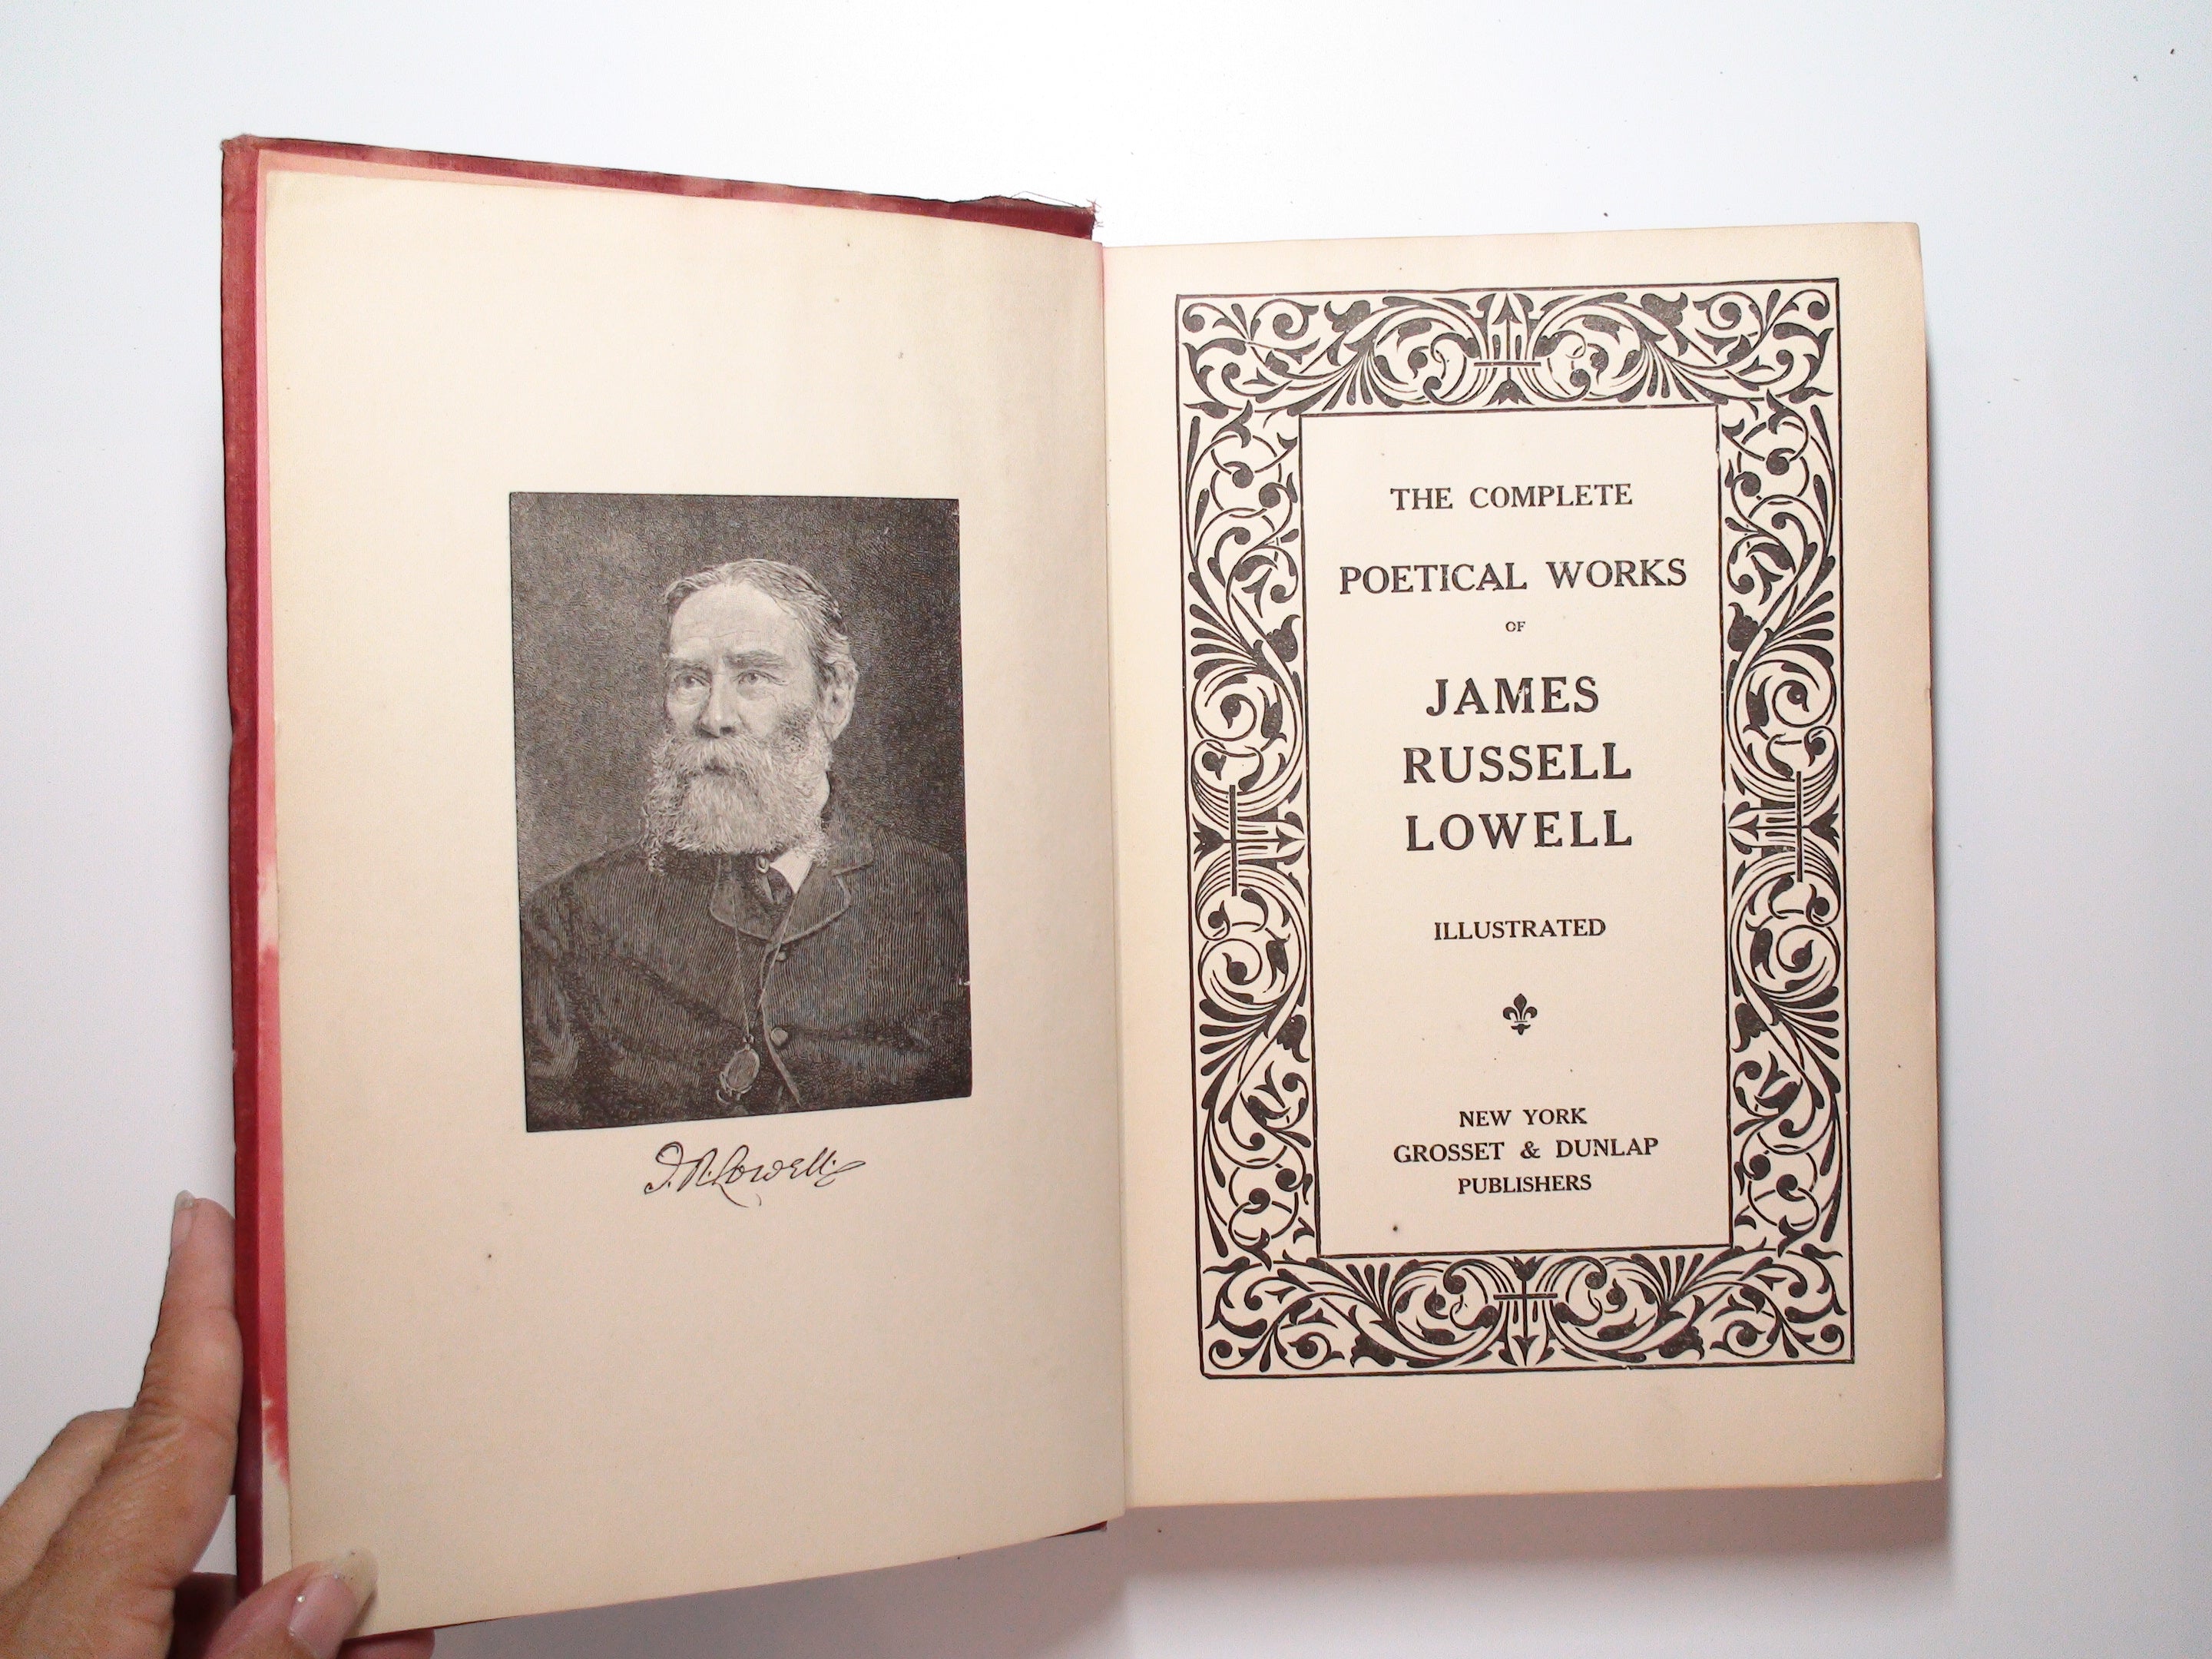 The Complete Works of James Russell Lowell, Illustrated, 1896